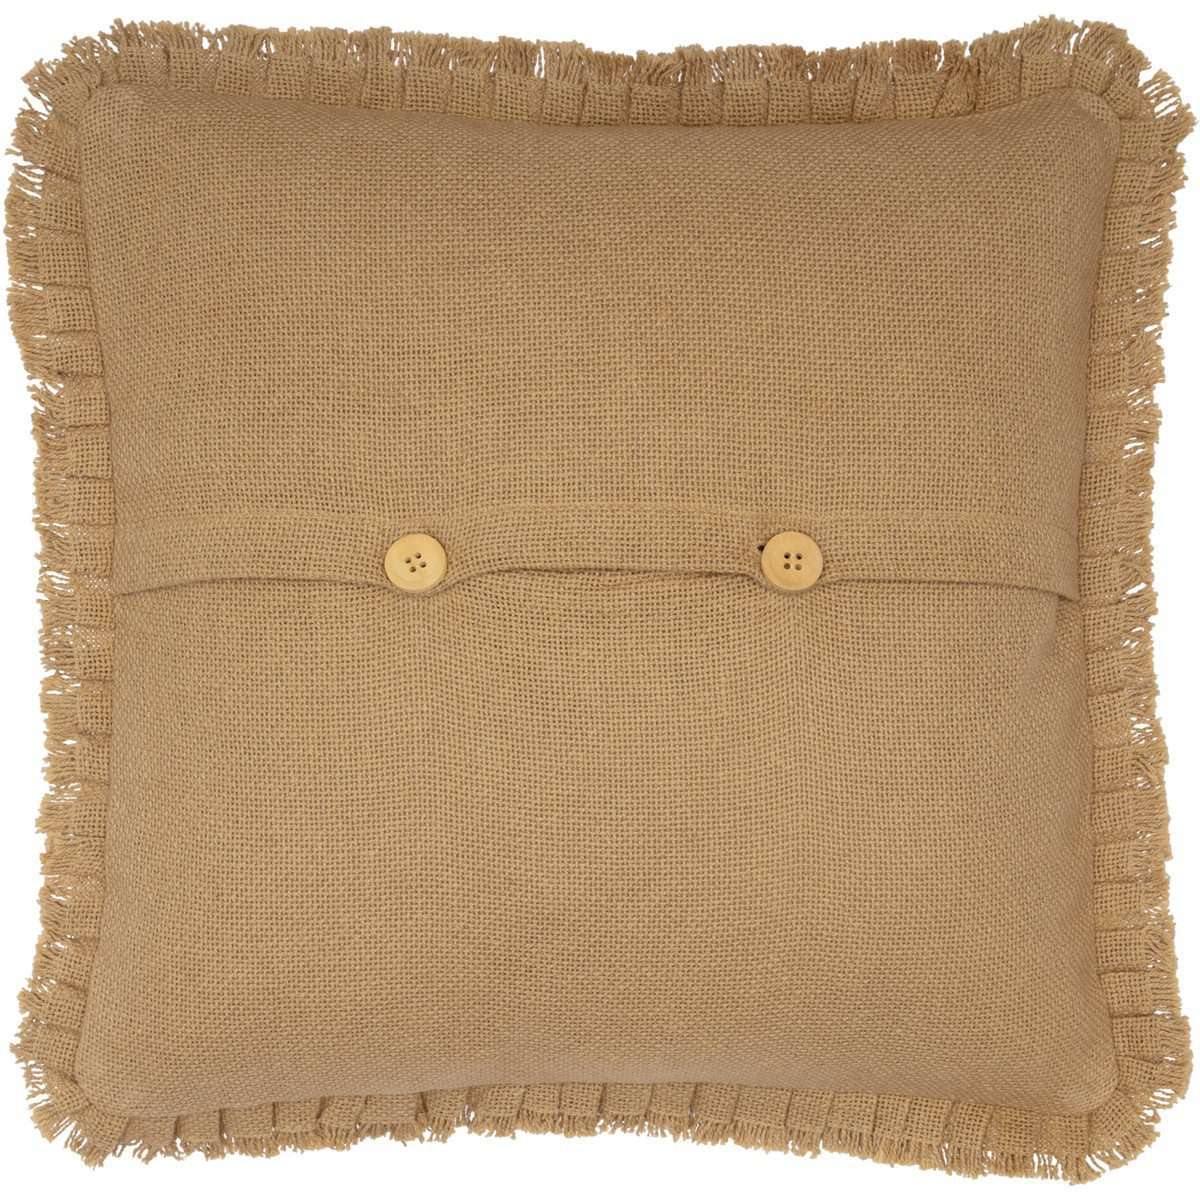 Burlap Natural Pillow w/ Fringed Ruffle 18x18 VHC Brands back